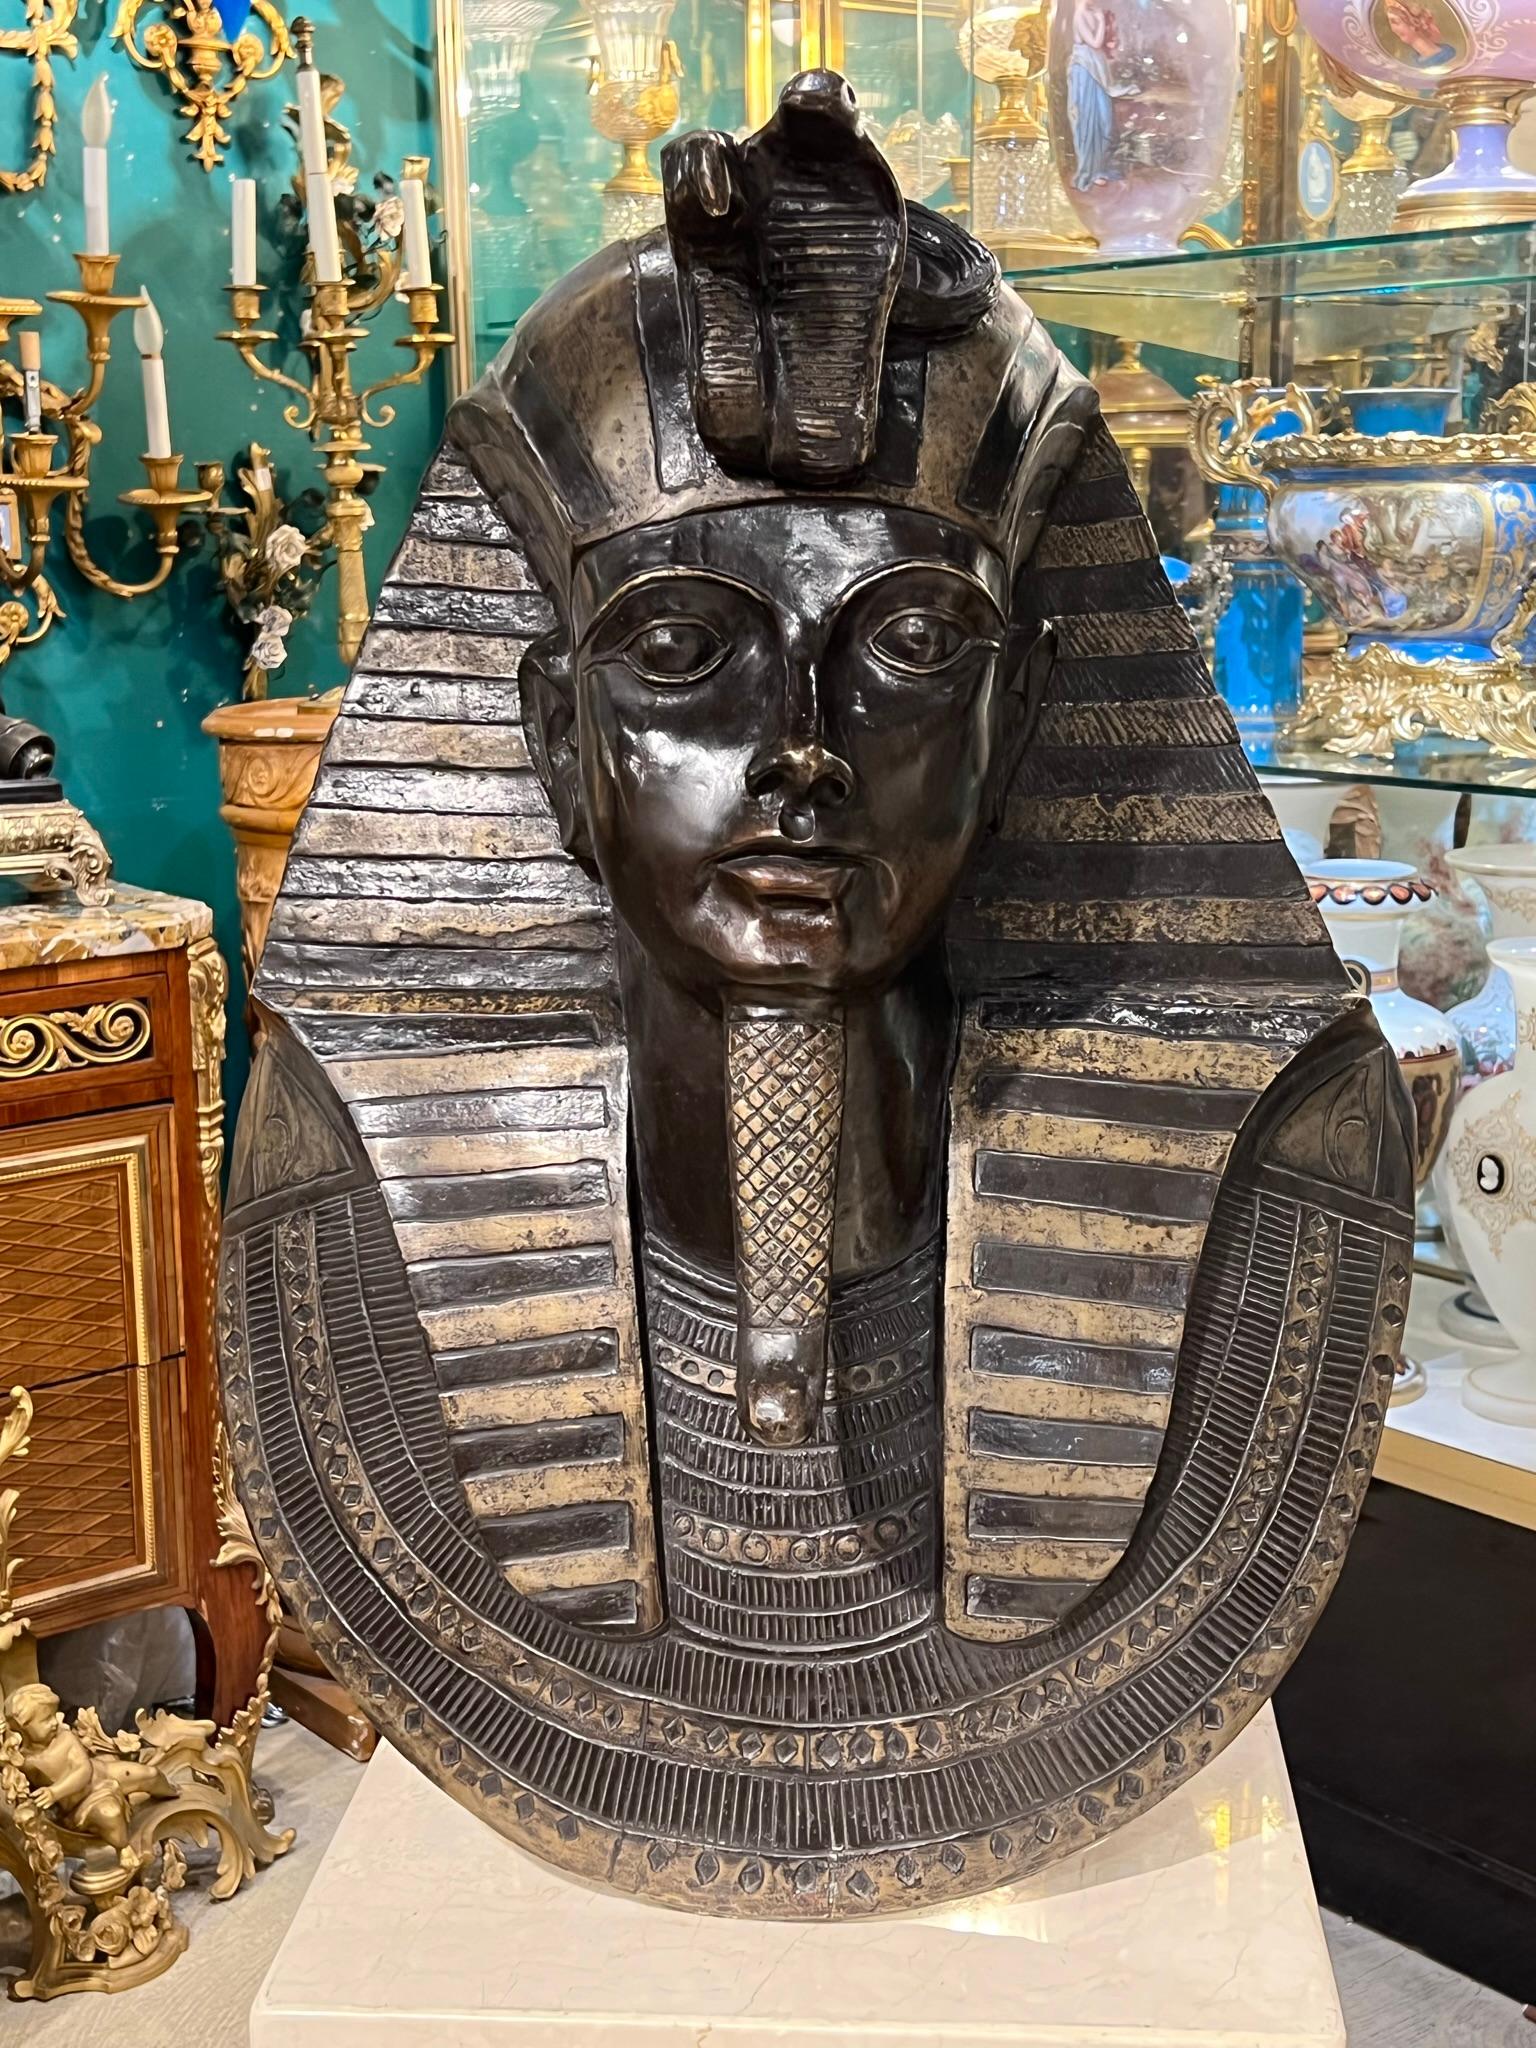 Finest quality French 19th century Life Size Grand Tour Bronze Sculpture of King Tut Burial Mask.